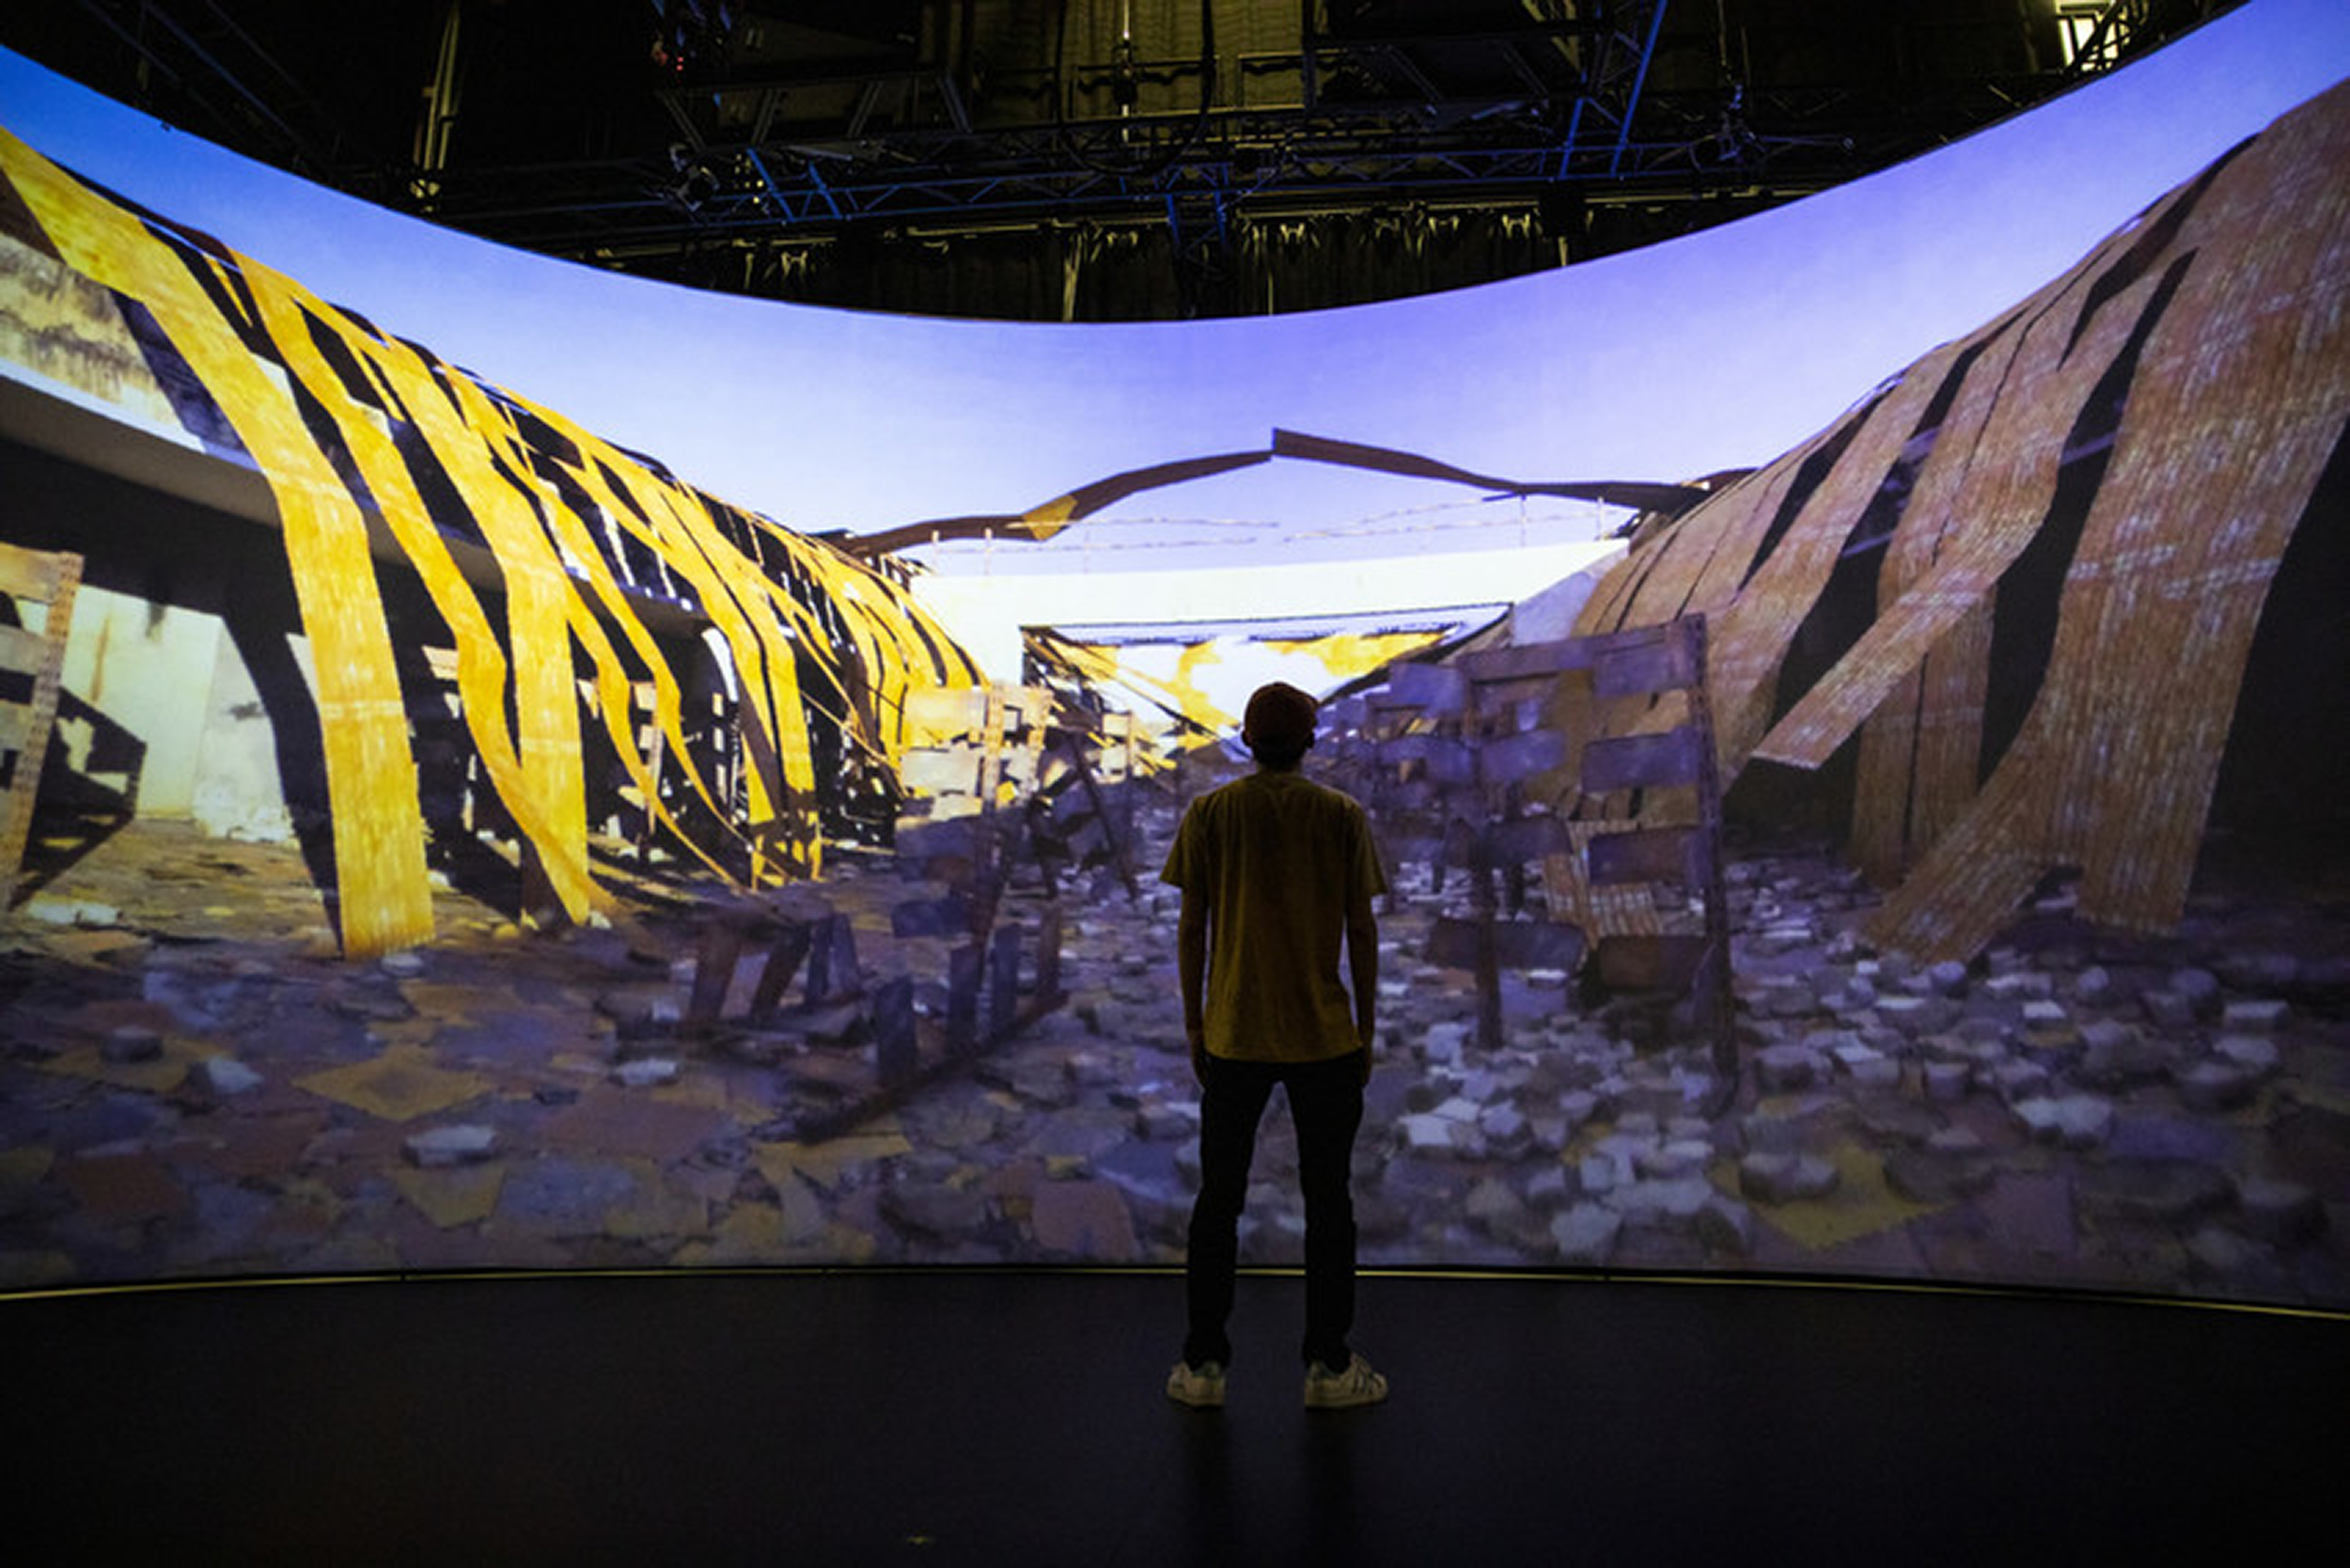 Xindi Liu works on finals touches to his project in the Cyclorama at the Cube